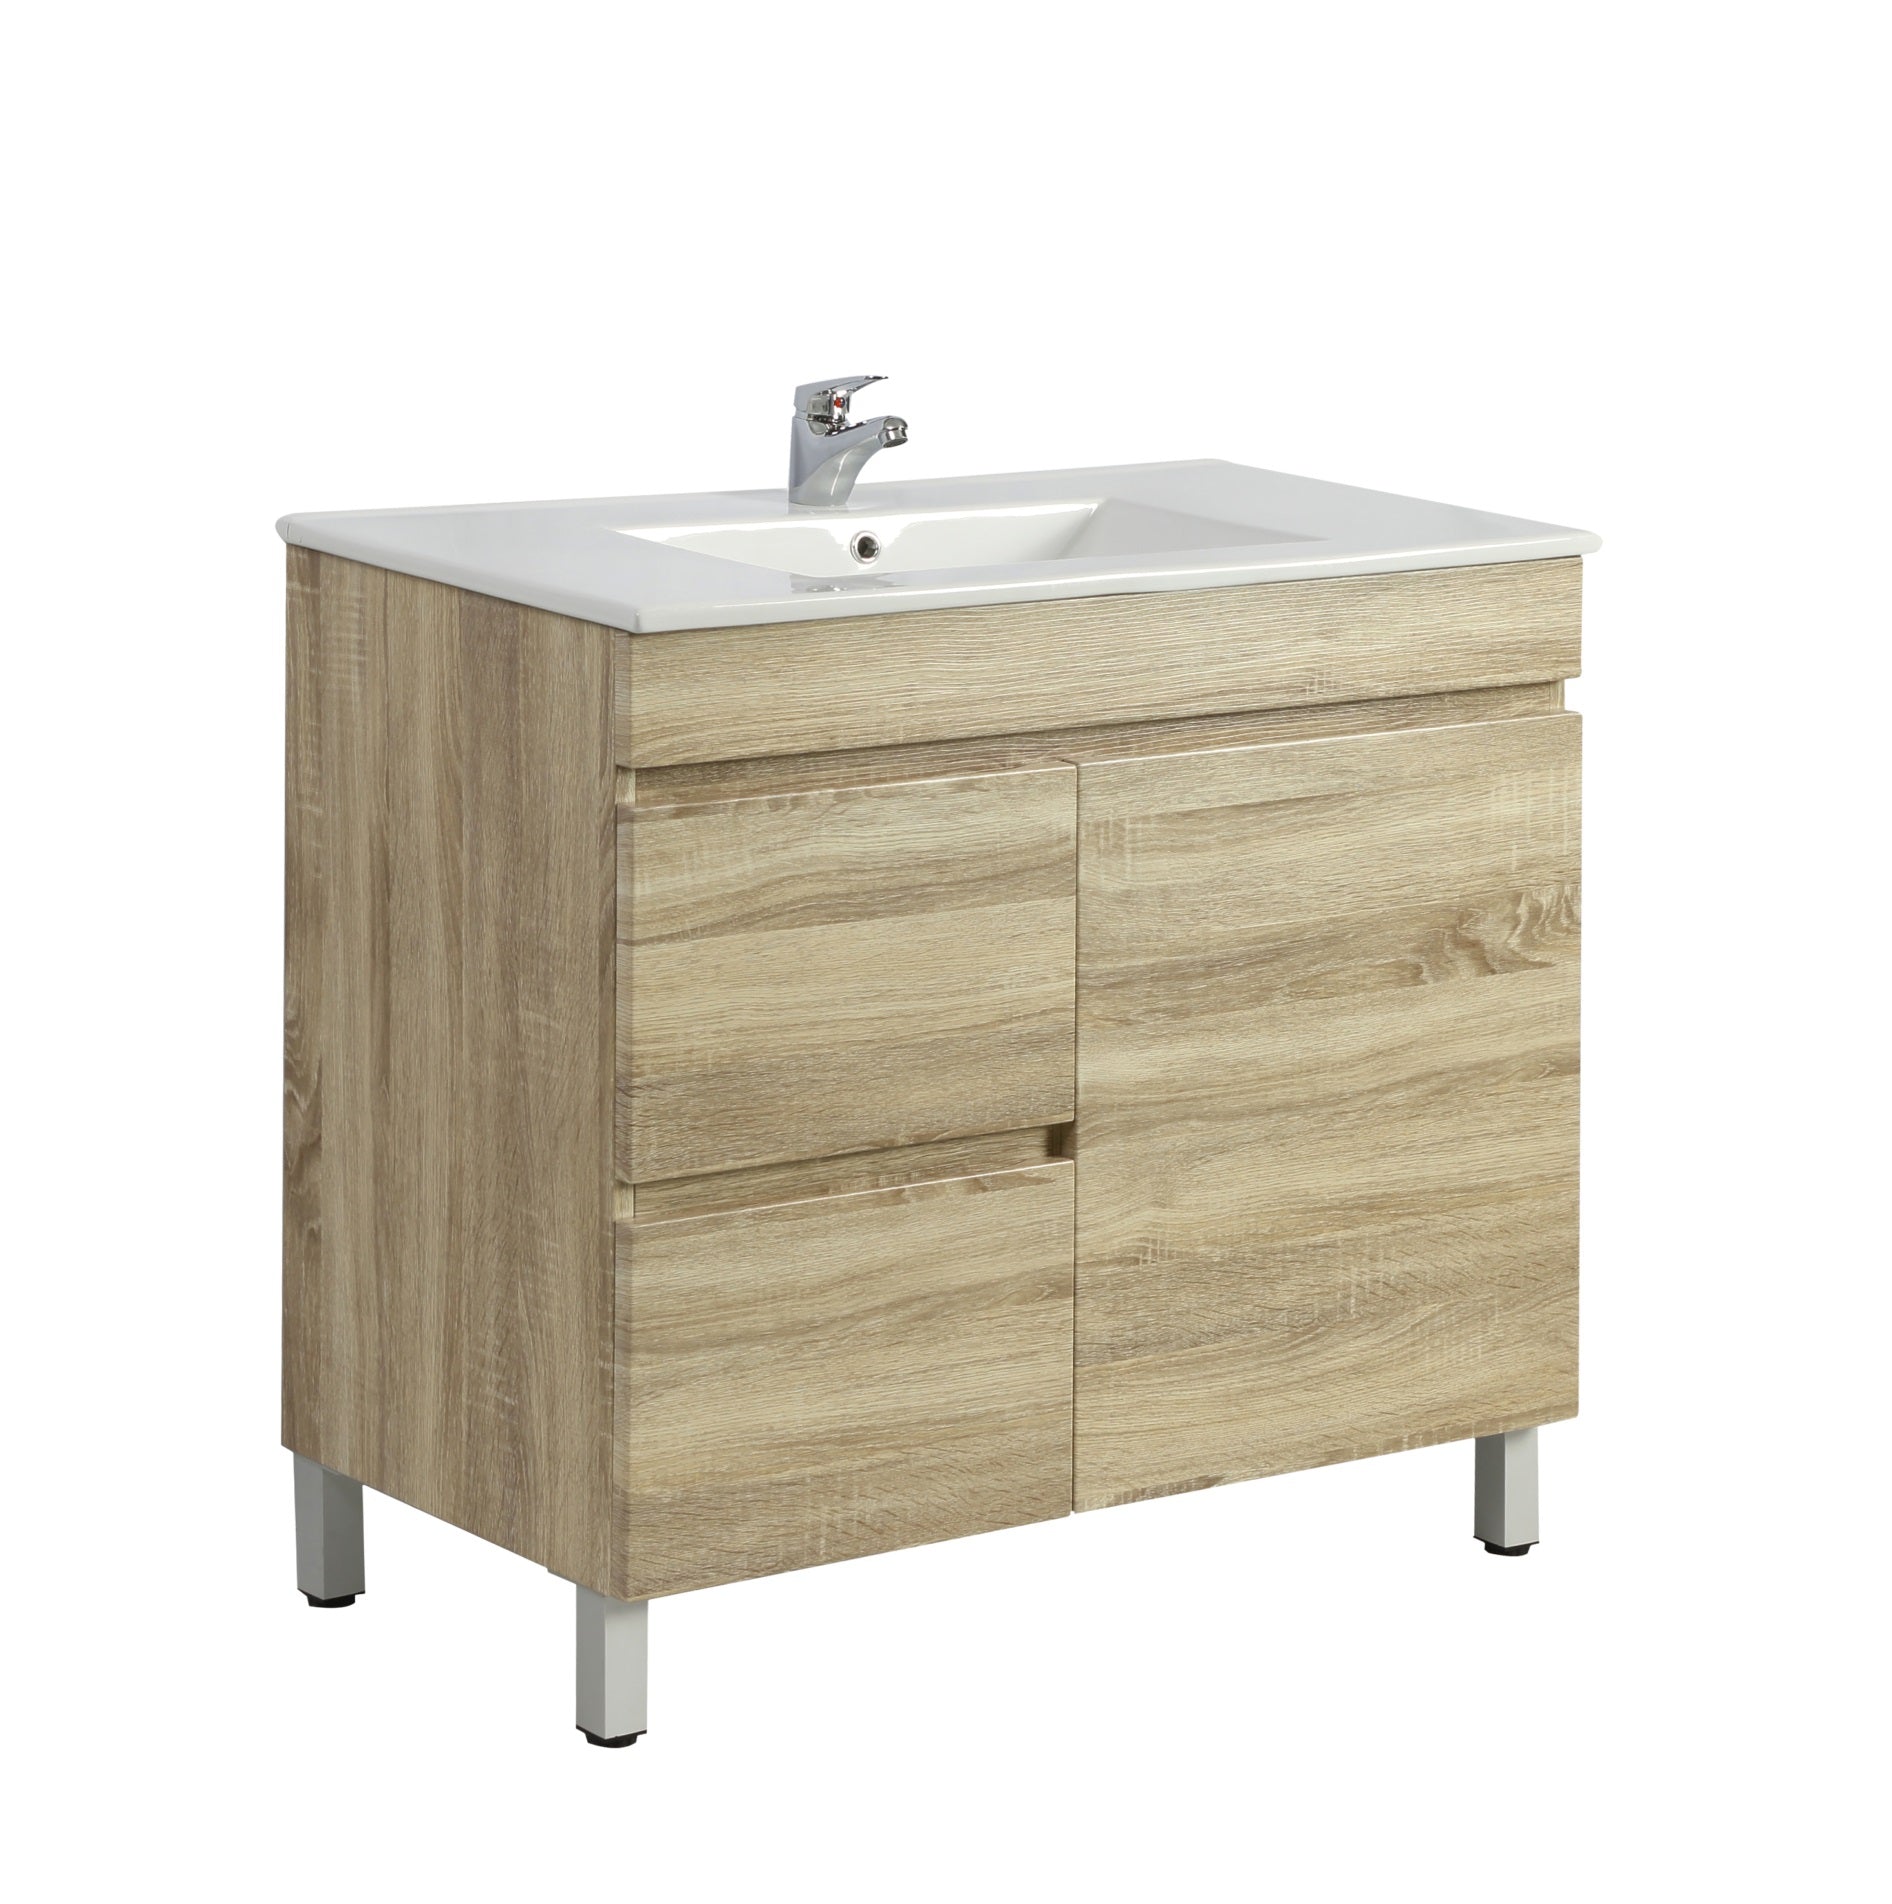 POSEIDON BERGE WHITE OAK 750MM FLOOR STANDING VANITY (AVAILABLE IN LEFT HAND DRAWER AND RIGHT HAND DRAWER)